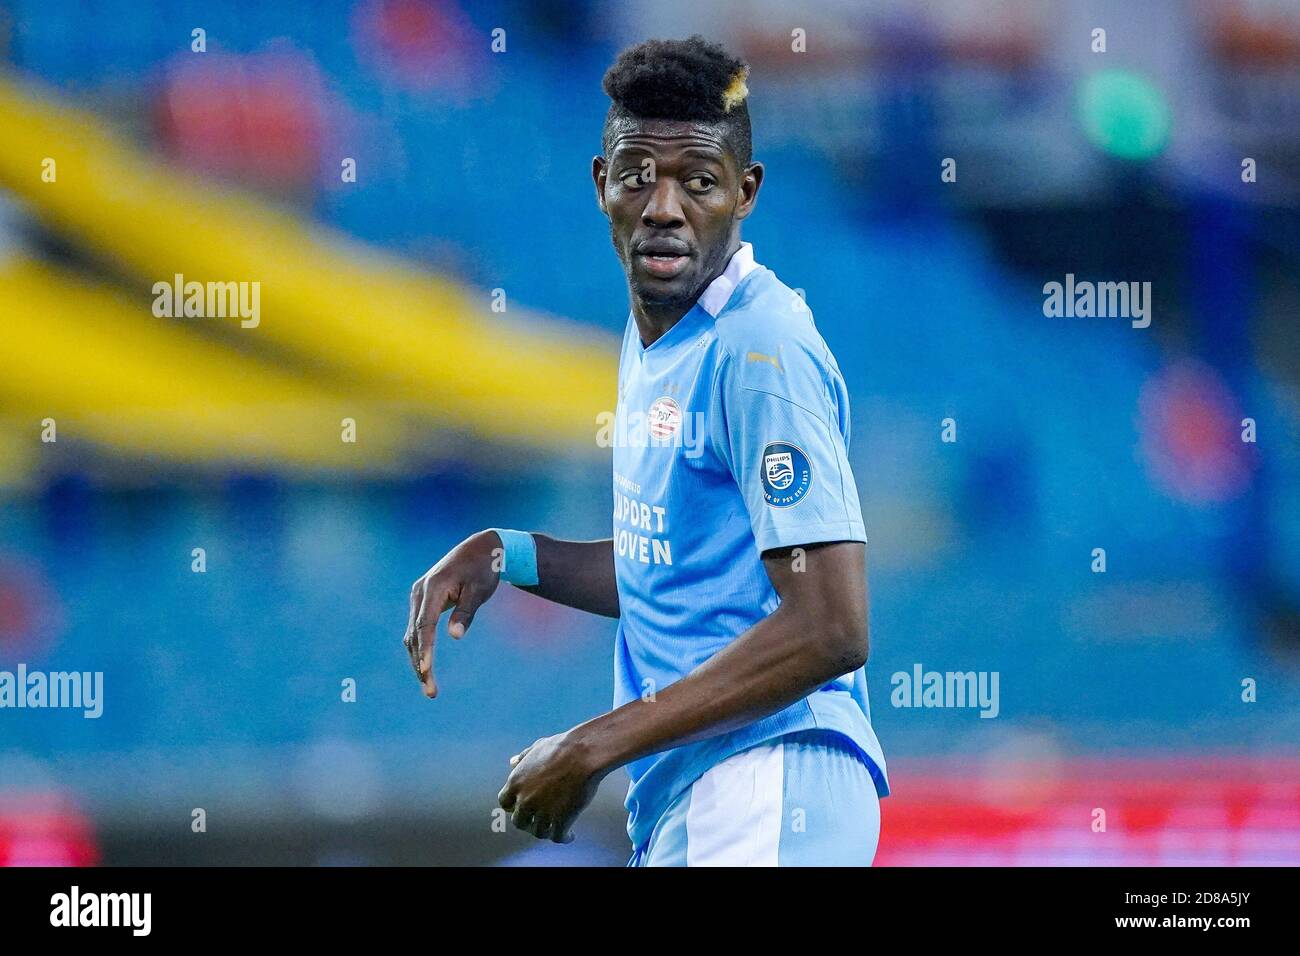 Ibrahim Sangare of PSV during the Netherlands championship Eredivisie football match between Vitesse and PSV on October 25, 2020 at Gelredome Stadiu C Stock Photo